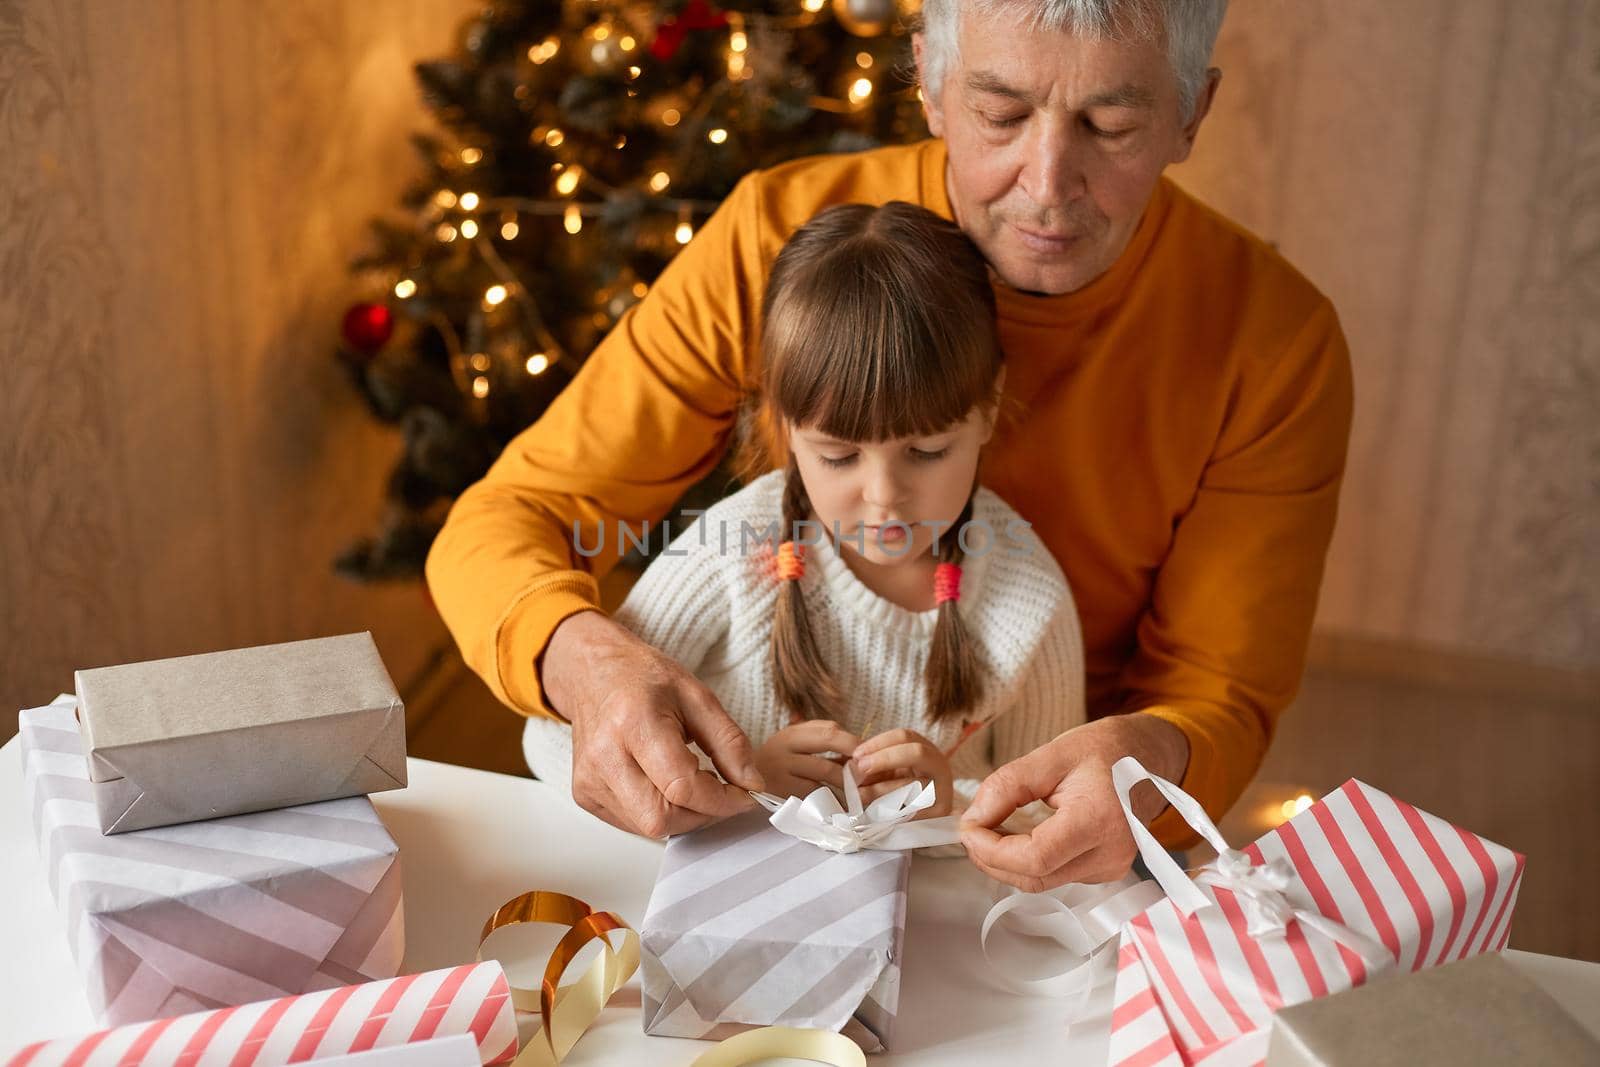 Grandfather packing christmas gifts with his charming granddaughter, sitting in room at table with fir tree on background, look concentrated, wearing casual clothing.